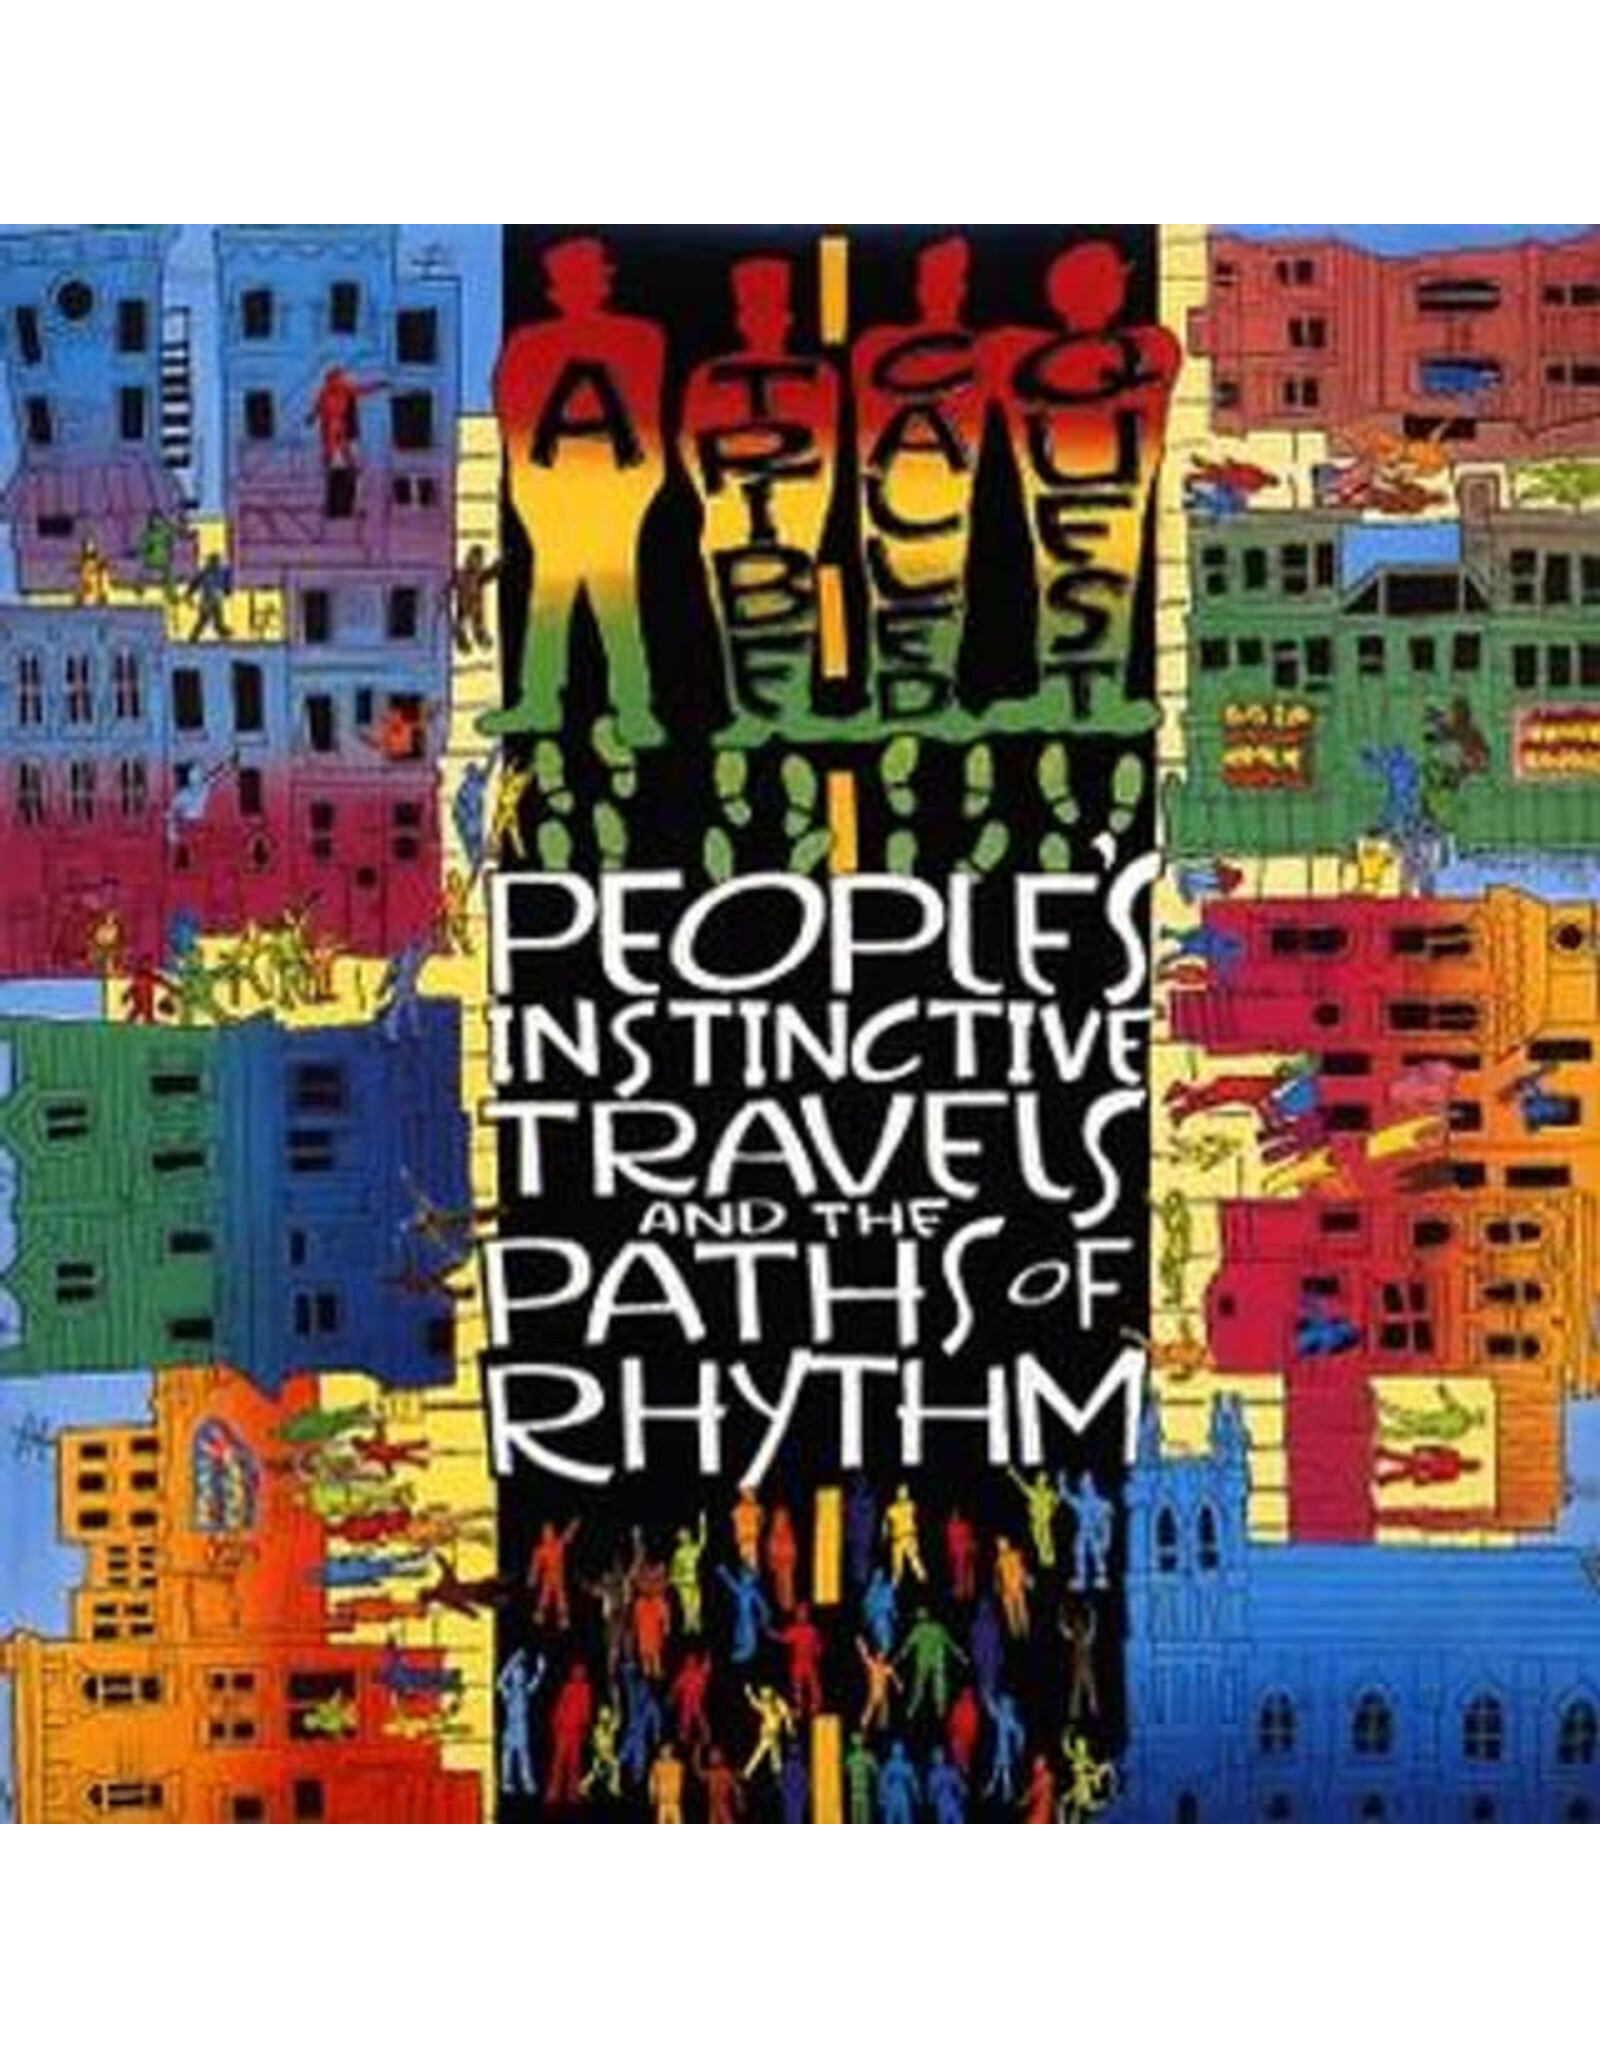 Jive A Tribe Called Quest: People's Instinctive Travels & Paths Of Rhythm LP